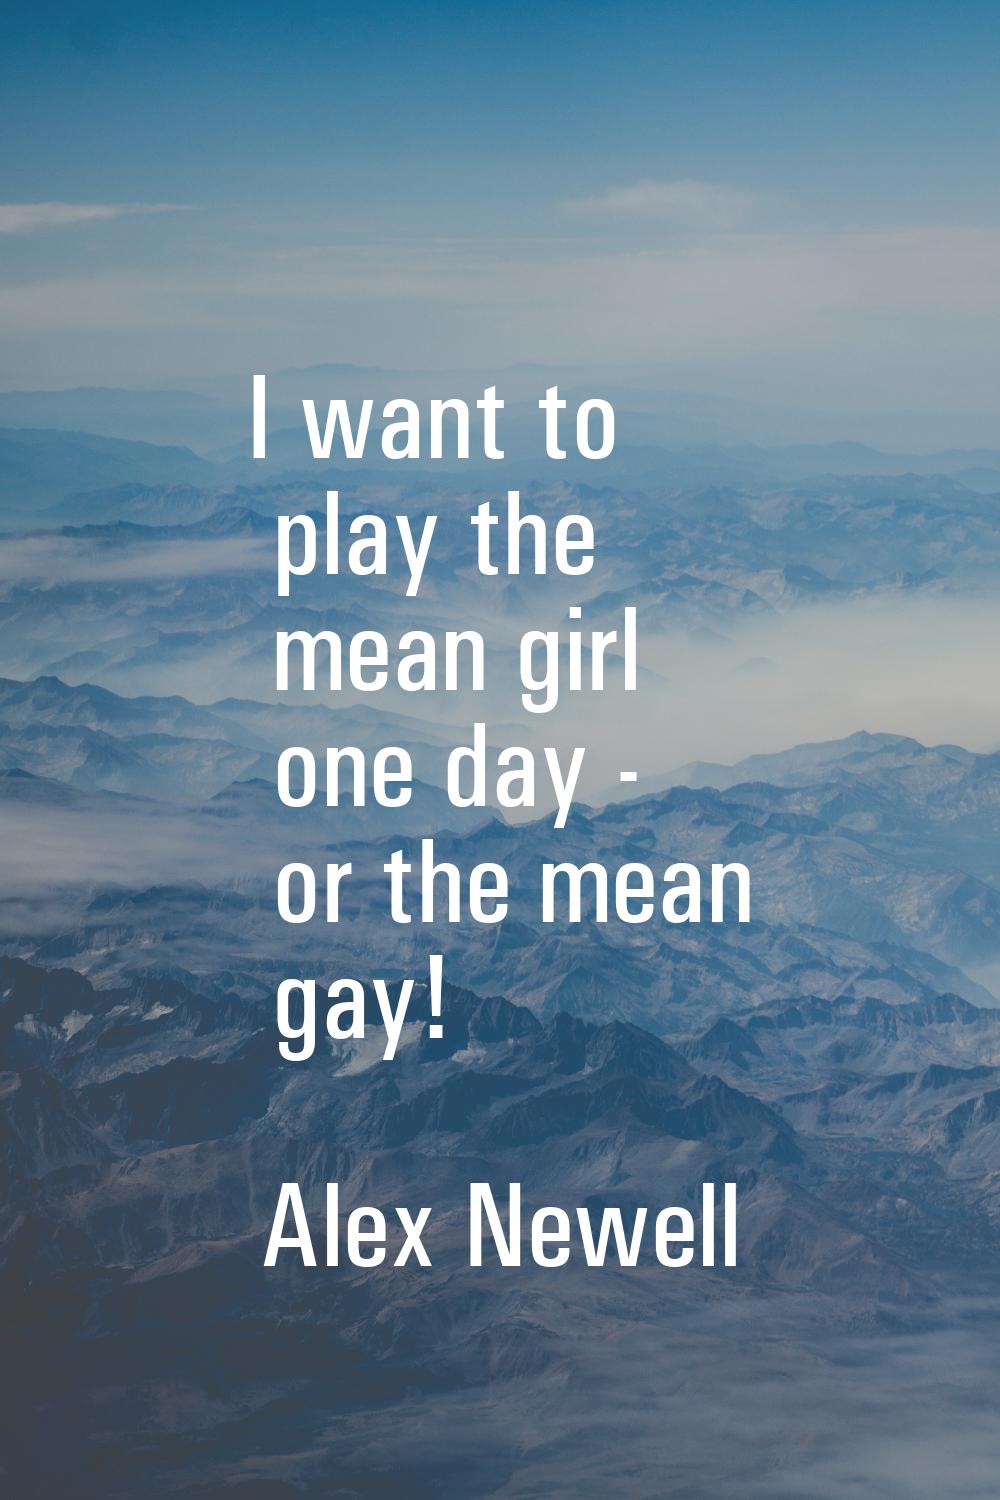 I want to play the mean girl one day - or the mean gay!